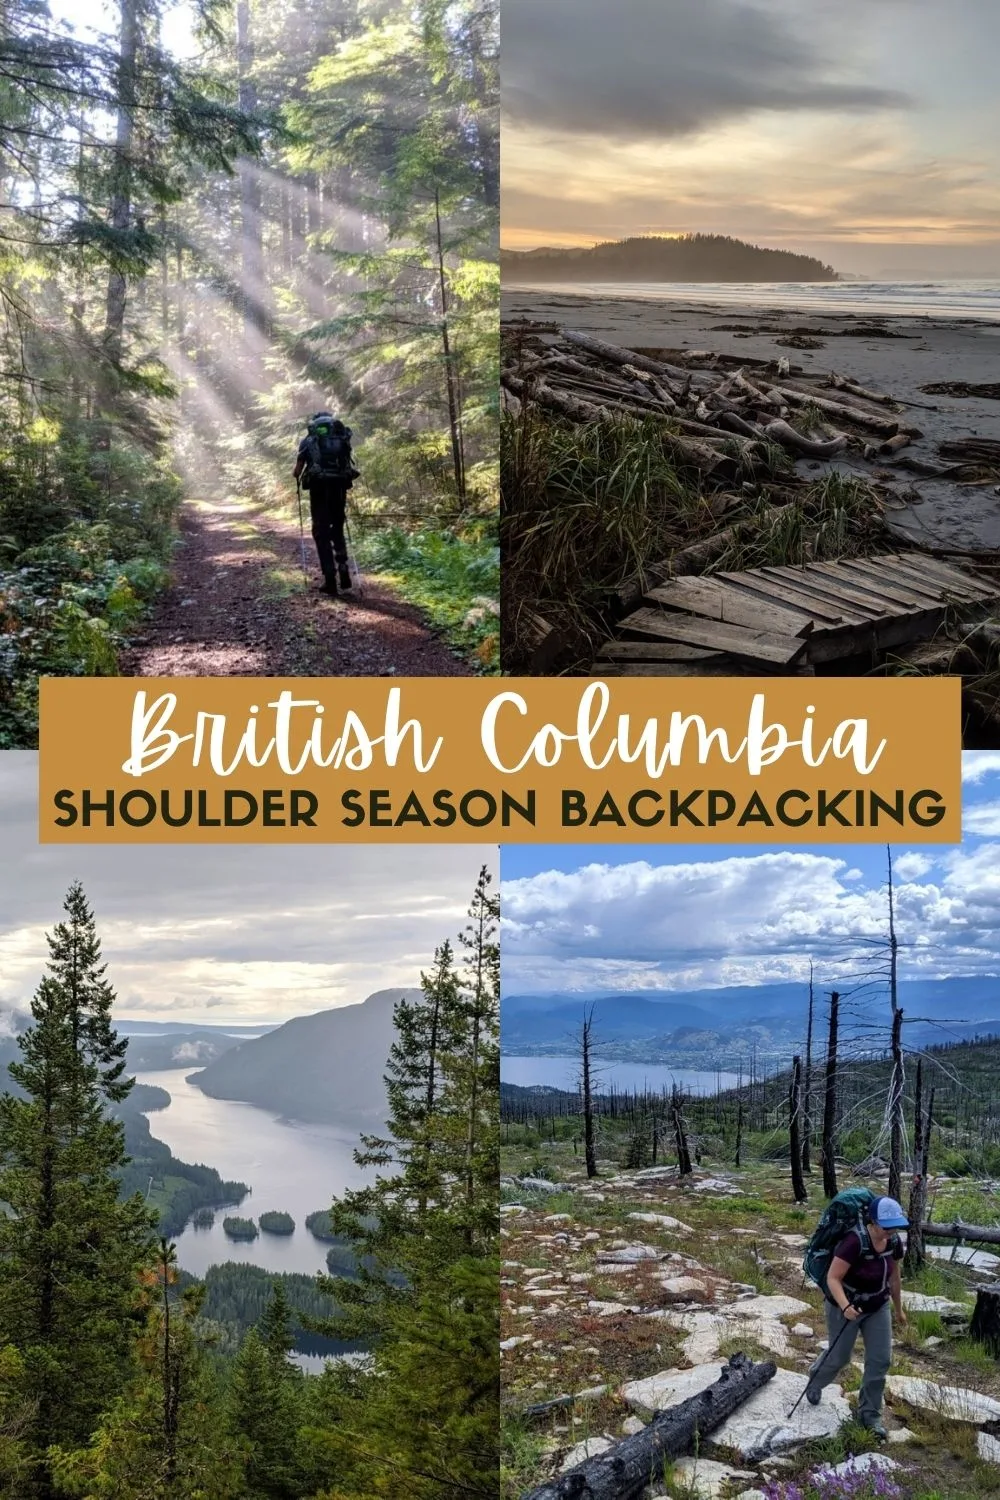 British Columbia is an amazing destination for backpacking but due to the mountainous terrain, it may seem that options for shoulder season are limited. Thankfully, this is not true! Click here to discover as many as 13 amazing shoulder season backpacking trips in BC, Canada! offtracktravel.ca